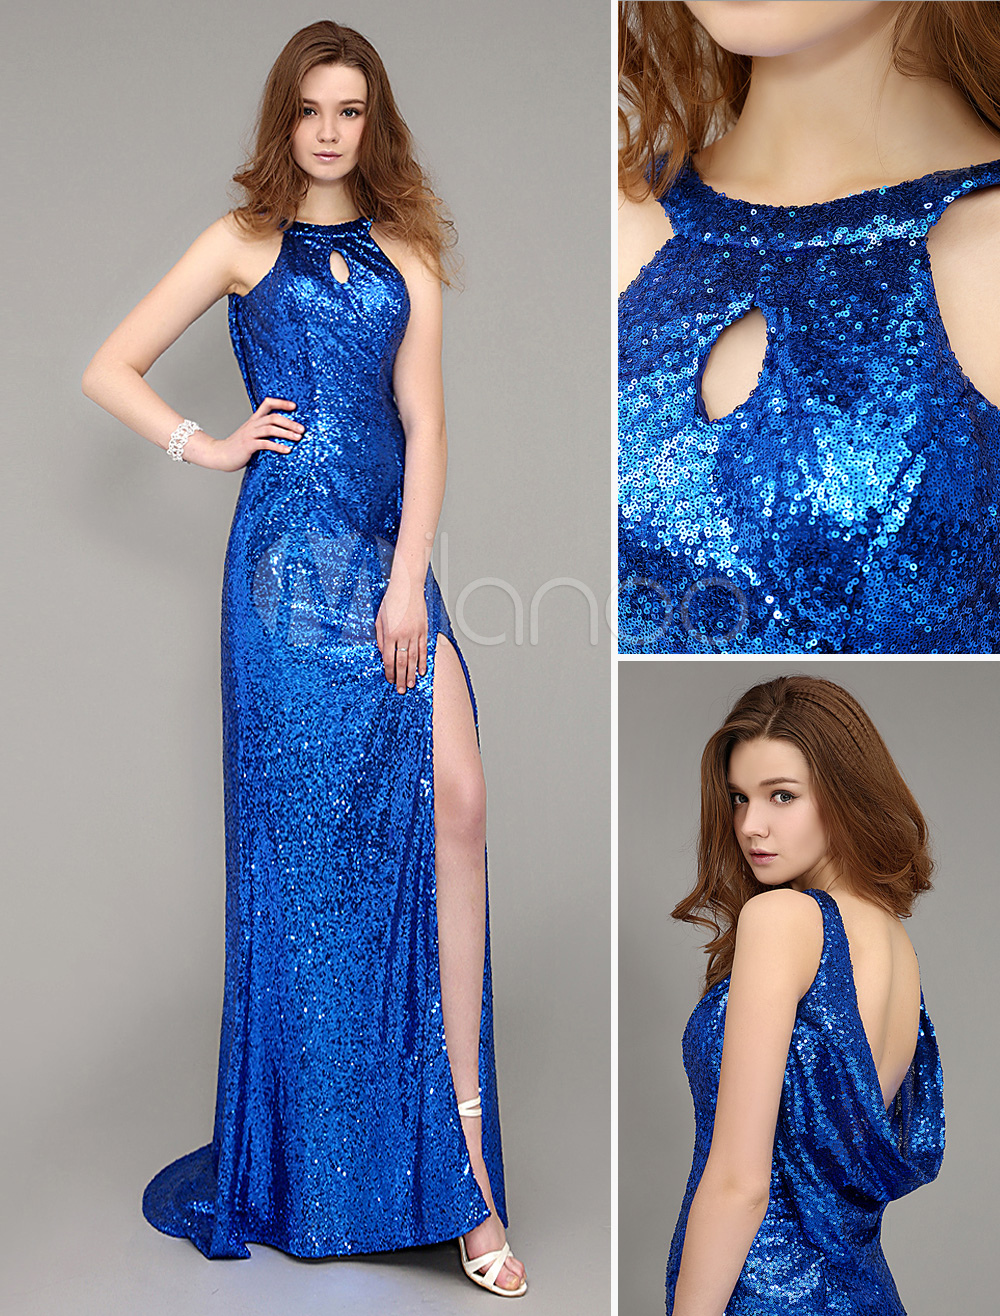 Royal Blue Cowl Back Sequined Long Evening Dress With Train (Wedding Evening Dresses) photo